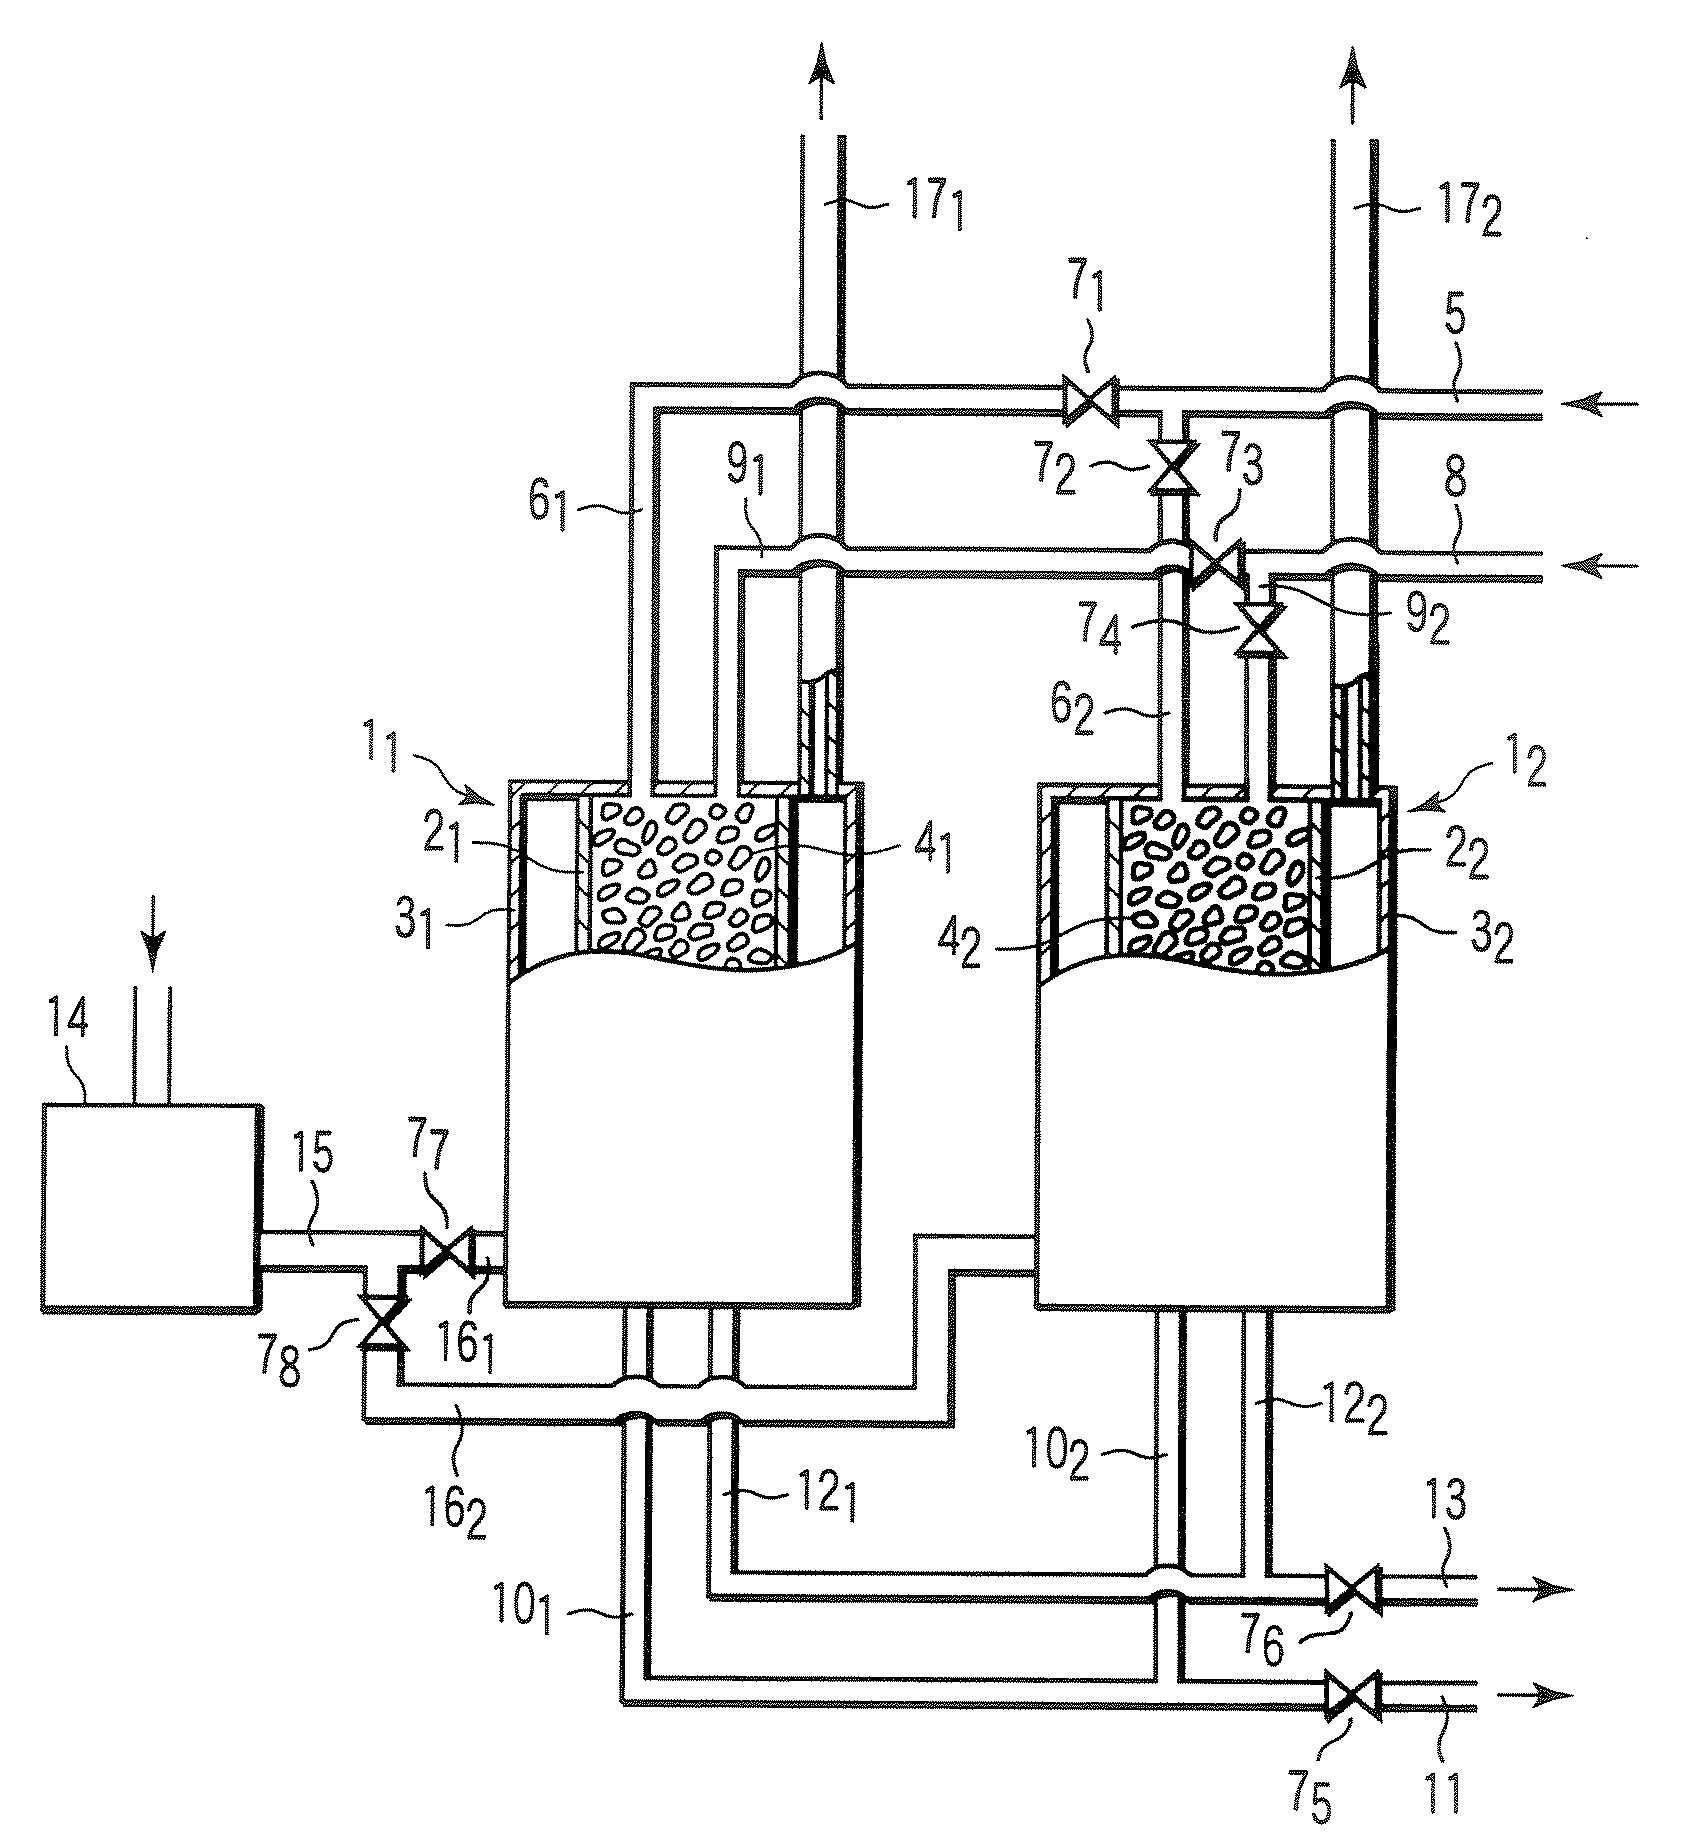 Carbon dioxide absorbent, carbon dioxide separating apparatus, and reformer